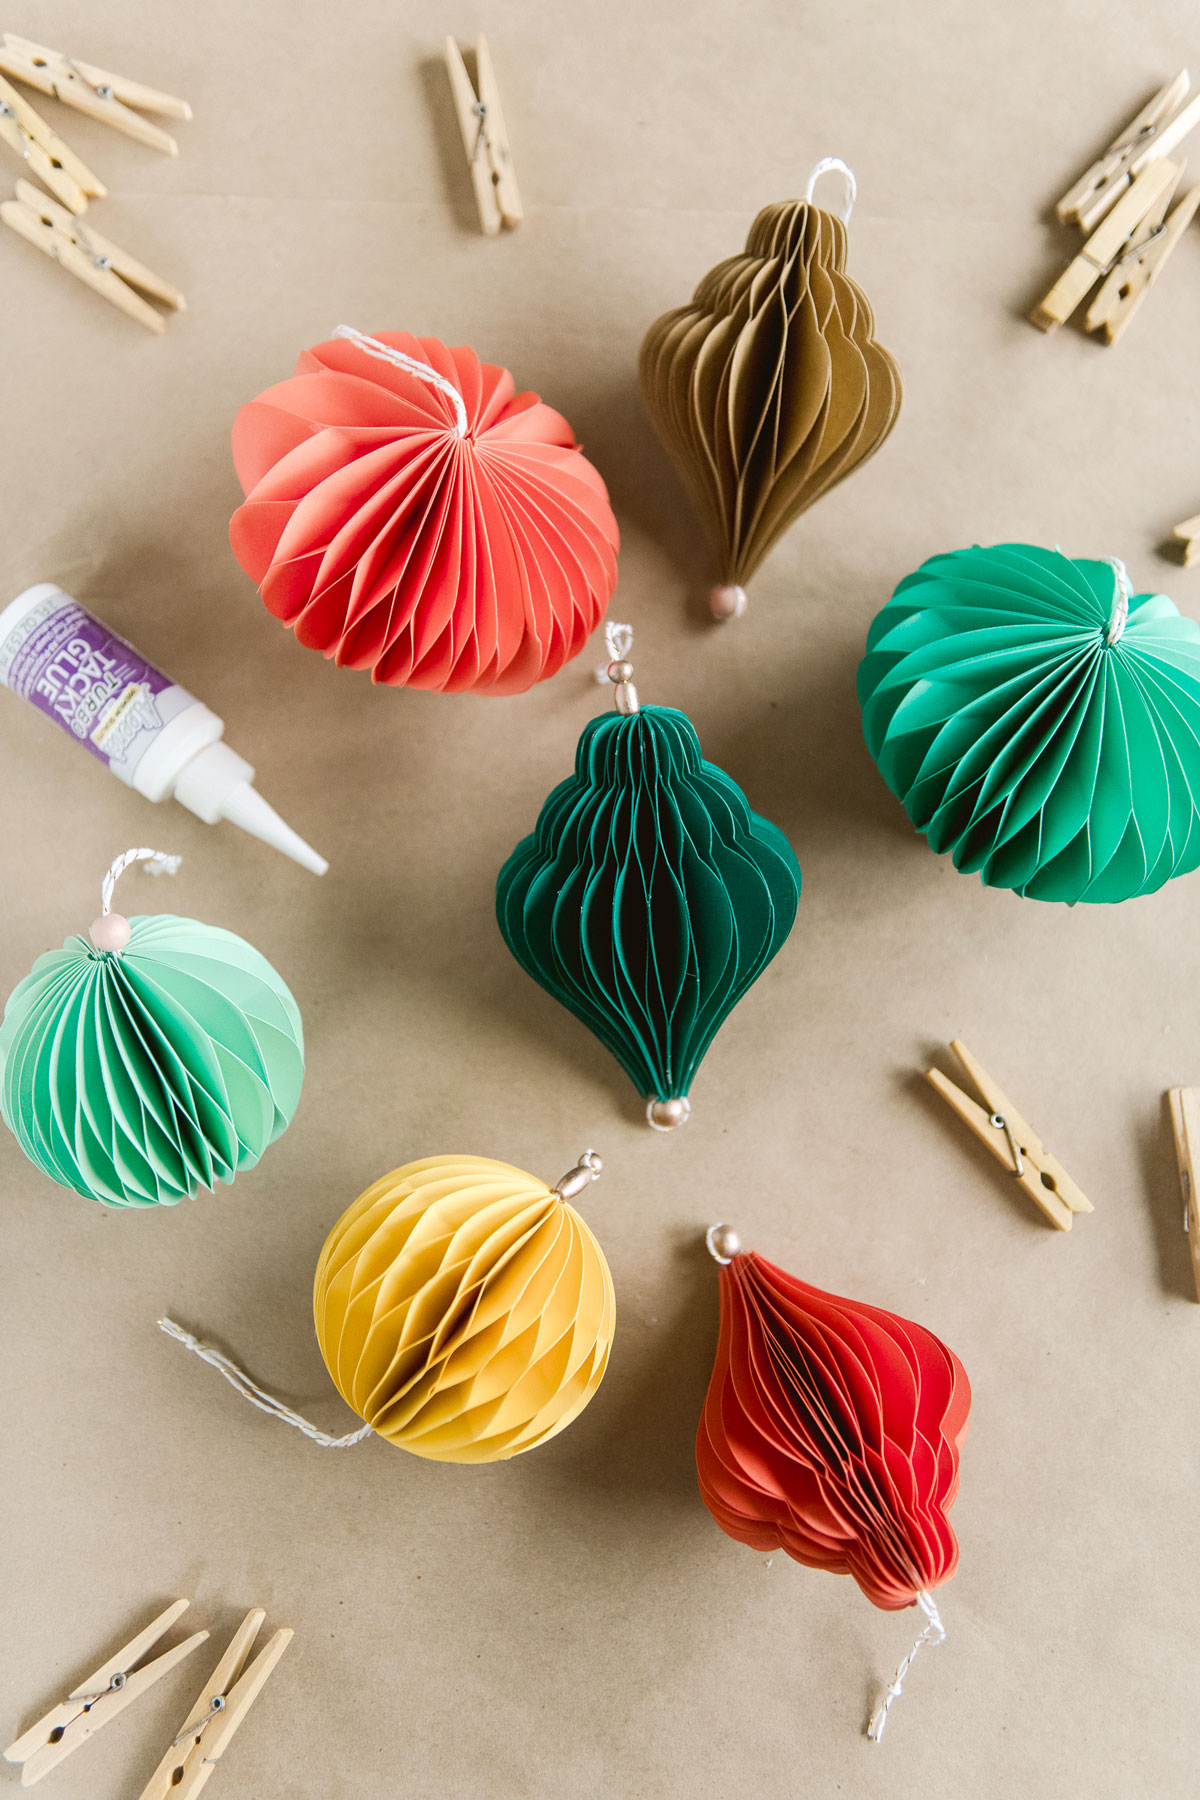 How to make honeycomb ornaments out of paper, Honeycomb ornament DIY, how to make paper ornaments, honeycomb ornament pattern, handmade christmas decorations, christmas decor ideas, colorful christmas decor